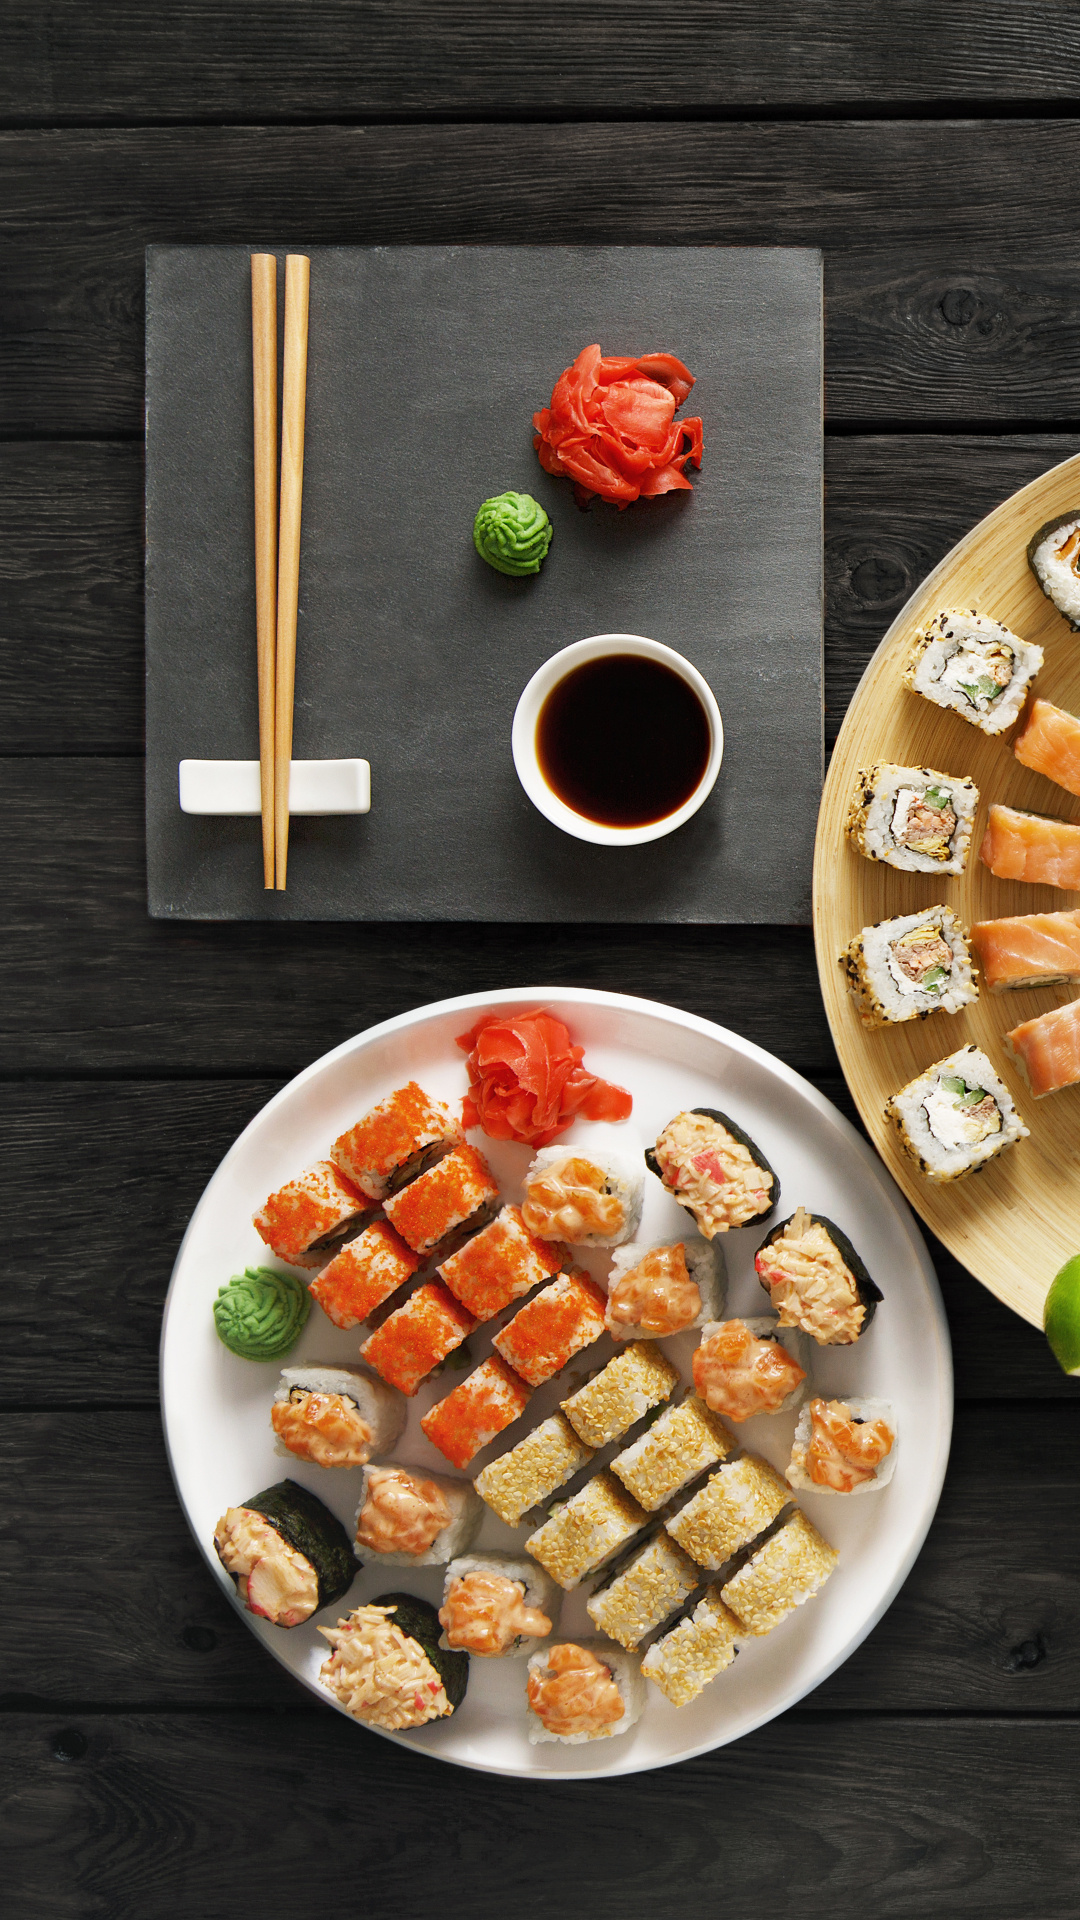 Sushi: One of the most popular dishes among Japanese, Traditional food. 1080x1920 Full HD Wallpaper.